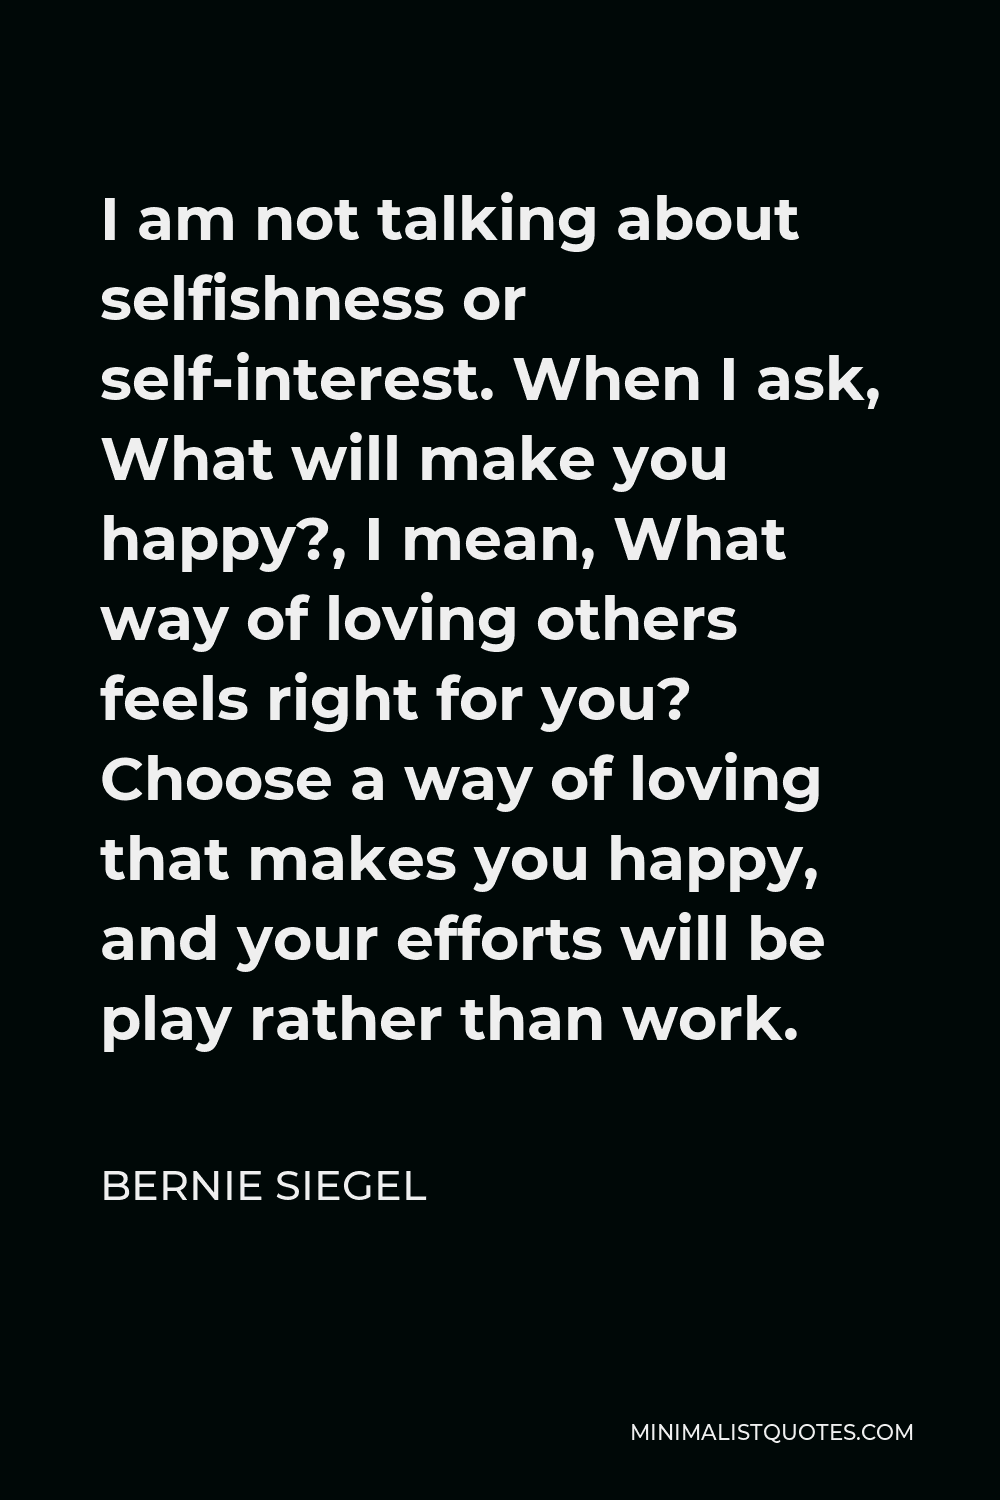 Bernie Siegel Quote - I am not talking about selfishness or self-interest. When I ask, What will make you happy?, I mean, What way of loving others feels right for you? Choose a way of loving that makes you happy, and your efforts will be play rather than work.